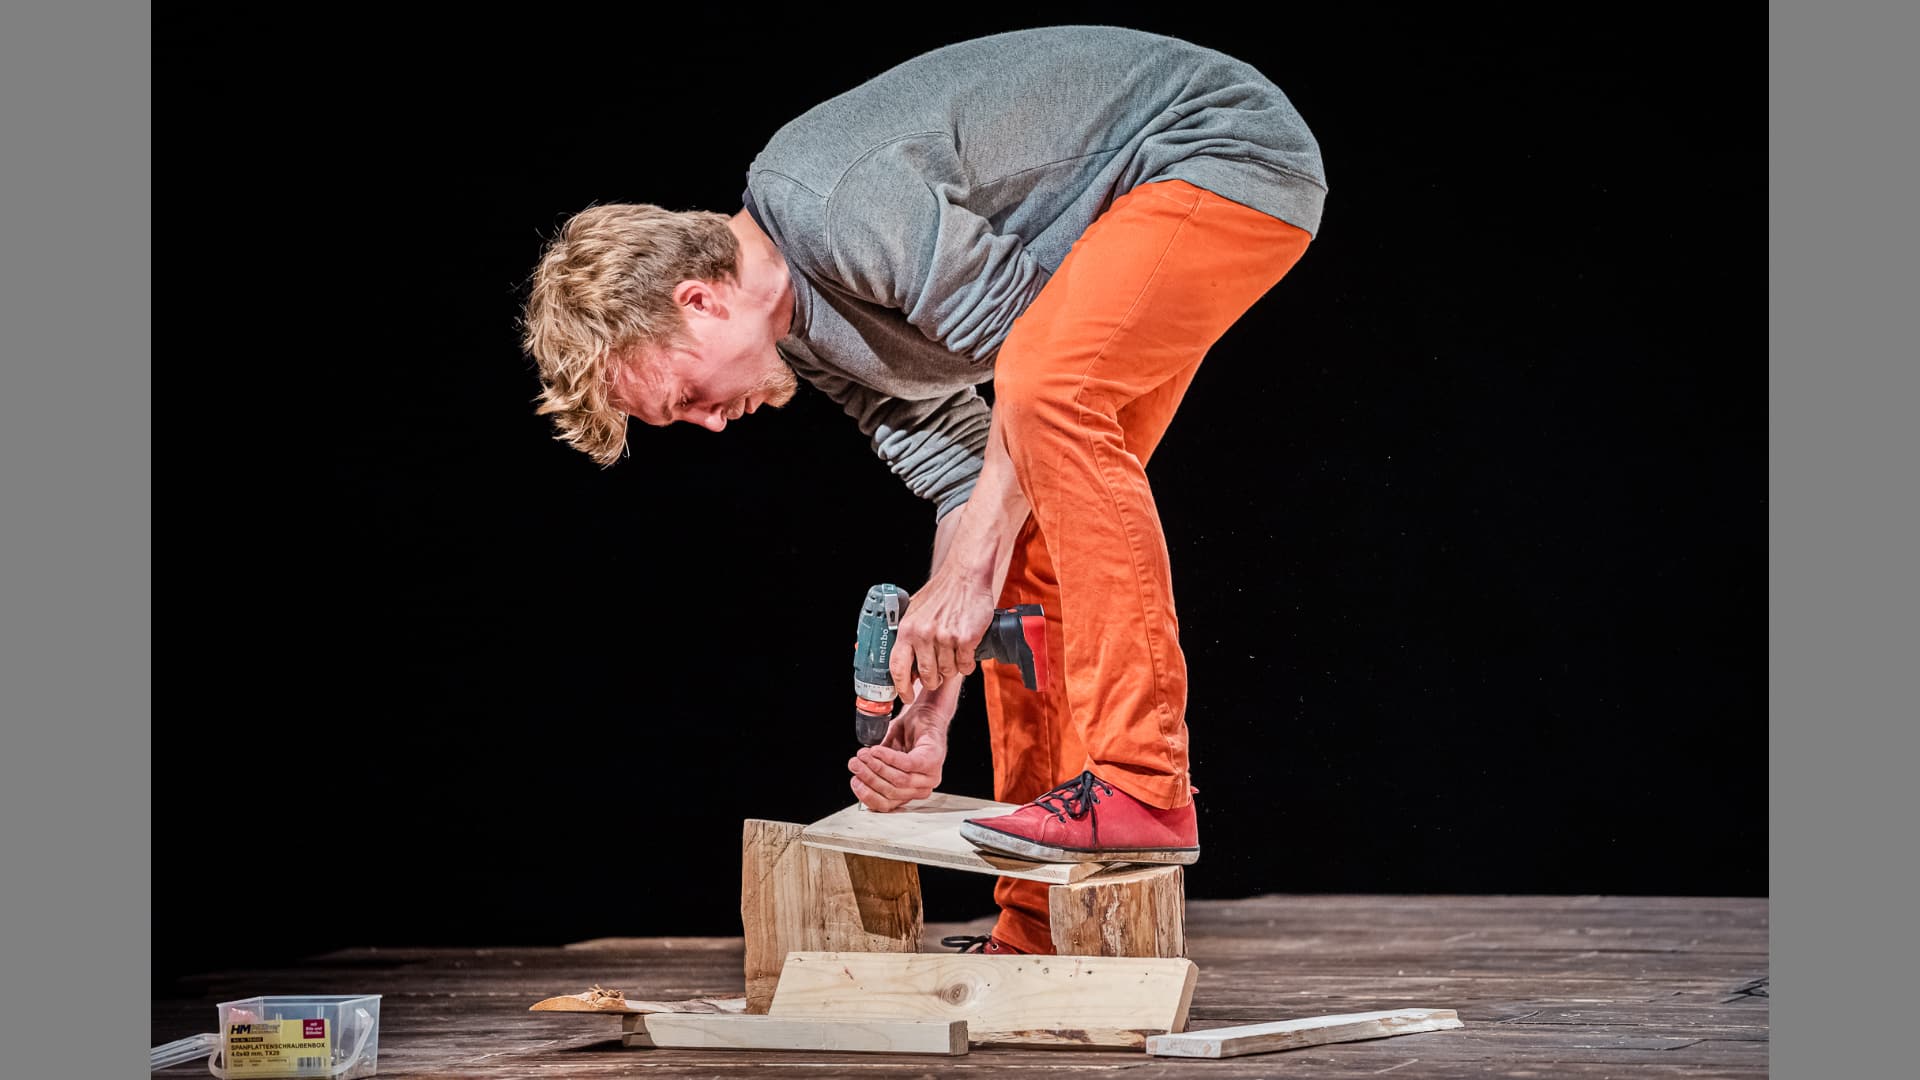 A performer leans down to screw together pieces of wood